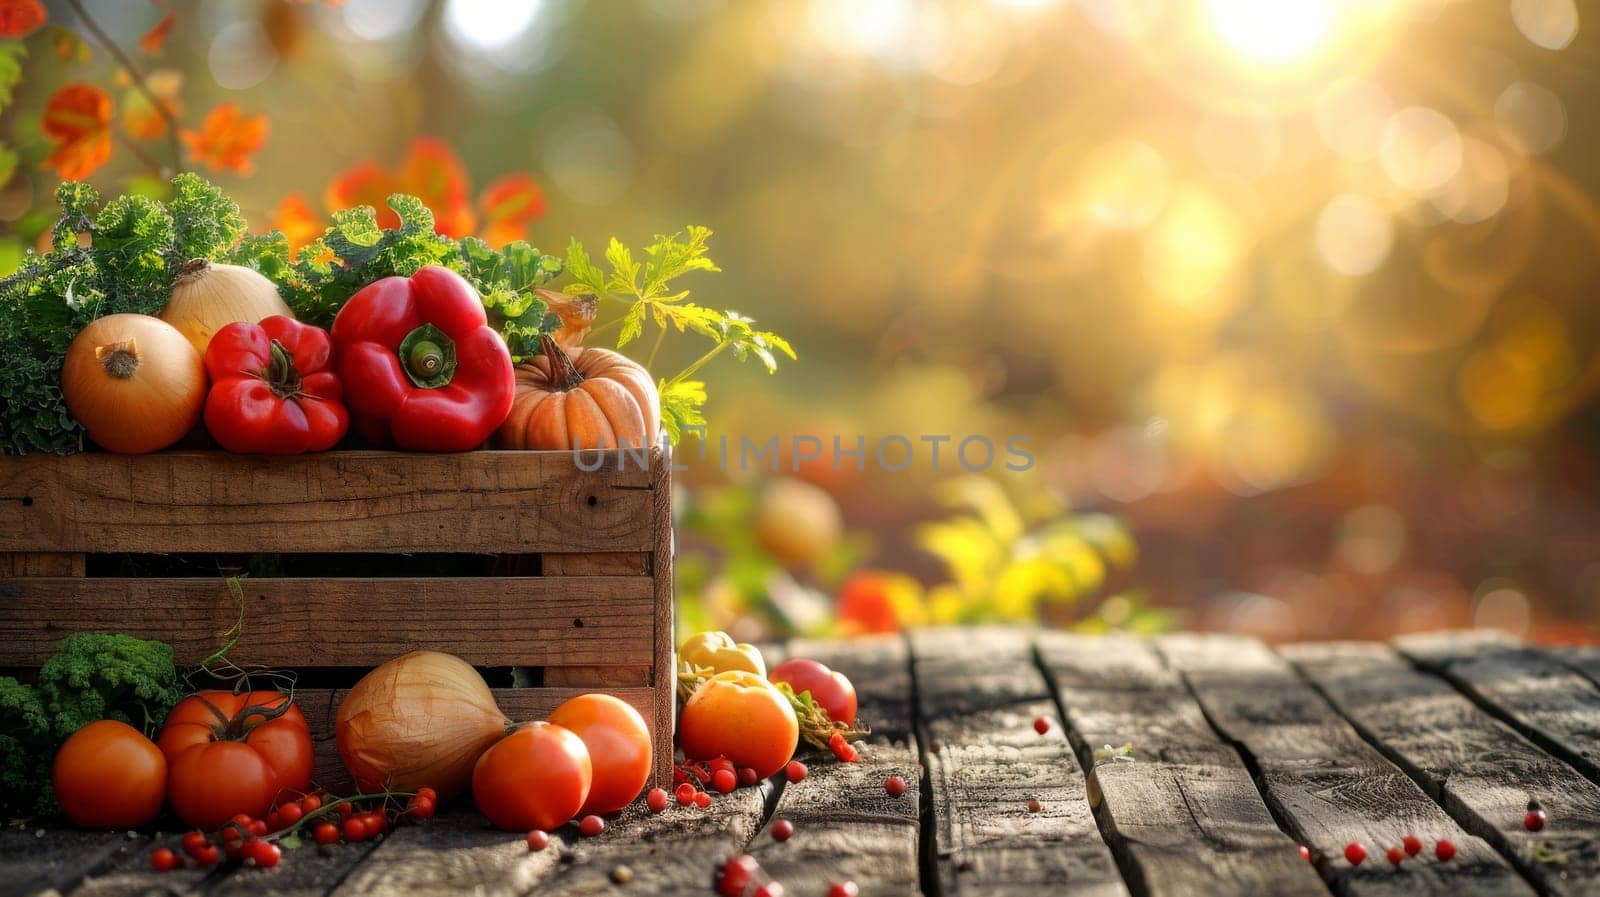 A basket of vegetables including tomatoes broccoli. Health care concept by itchaznong